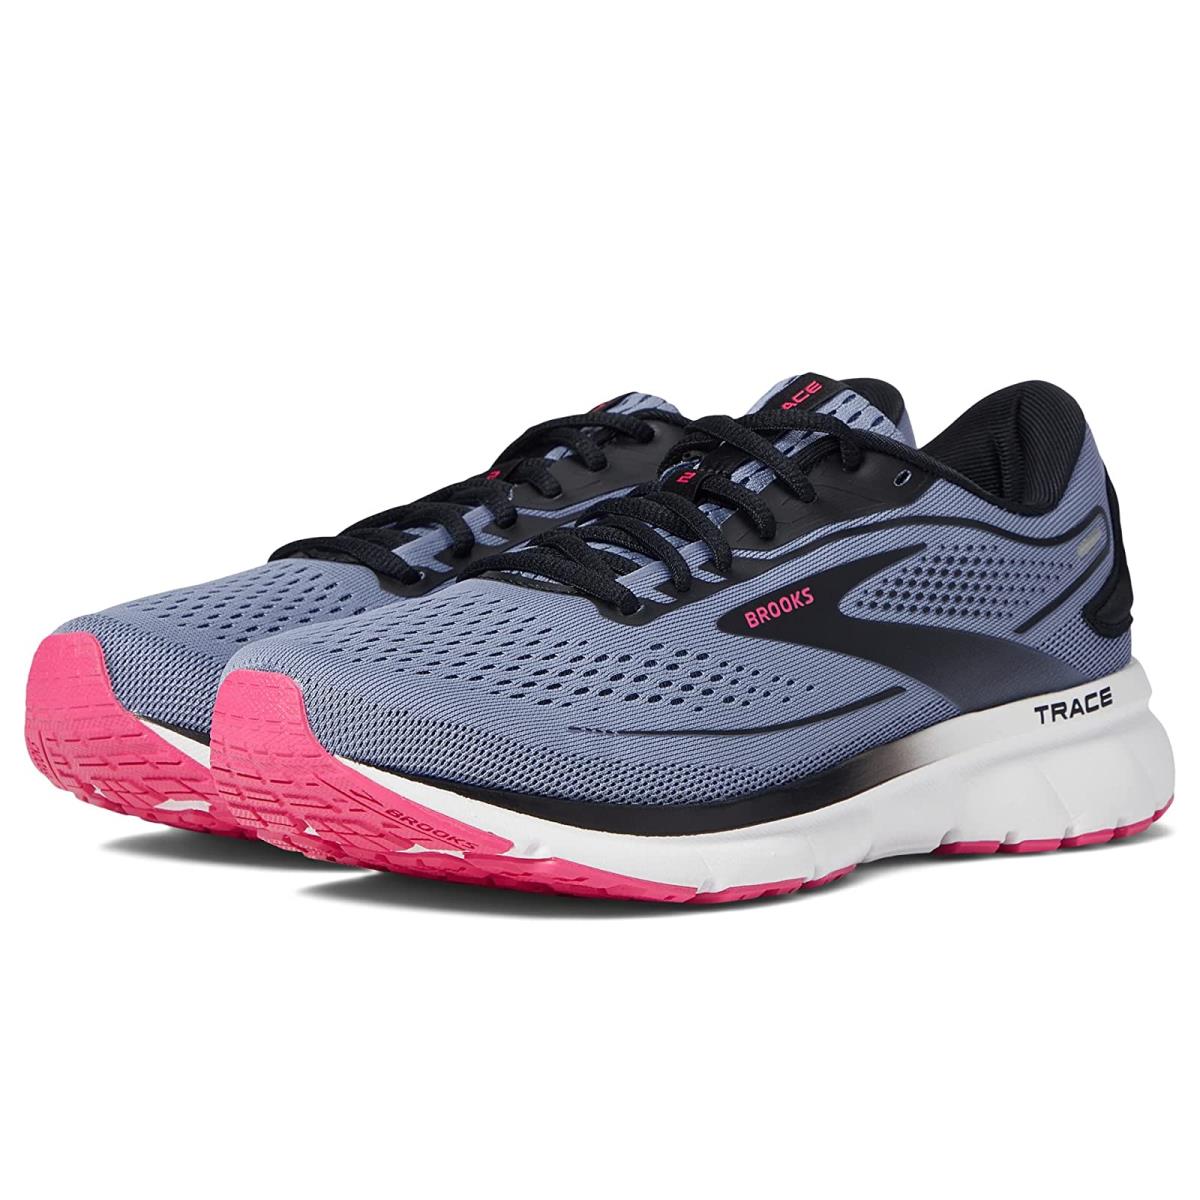 Woman`s Sneakers Athletic Shoes Brooks Trace 2 Purple Impression/Black/Pink